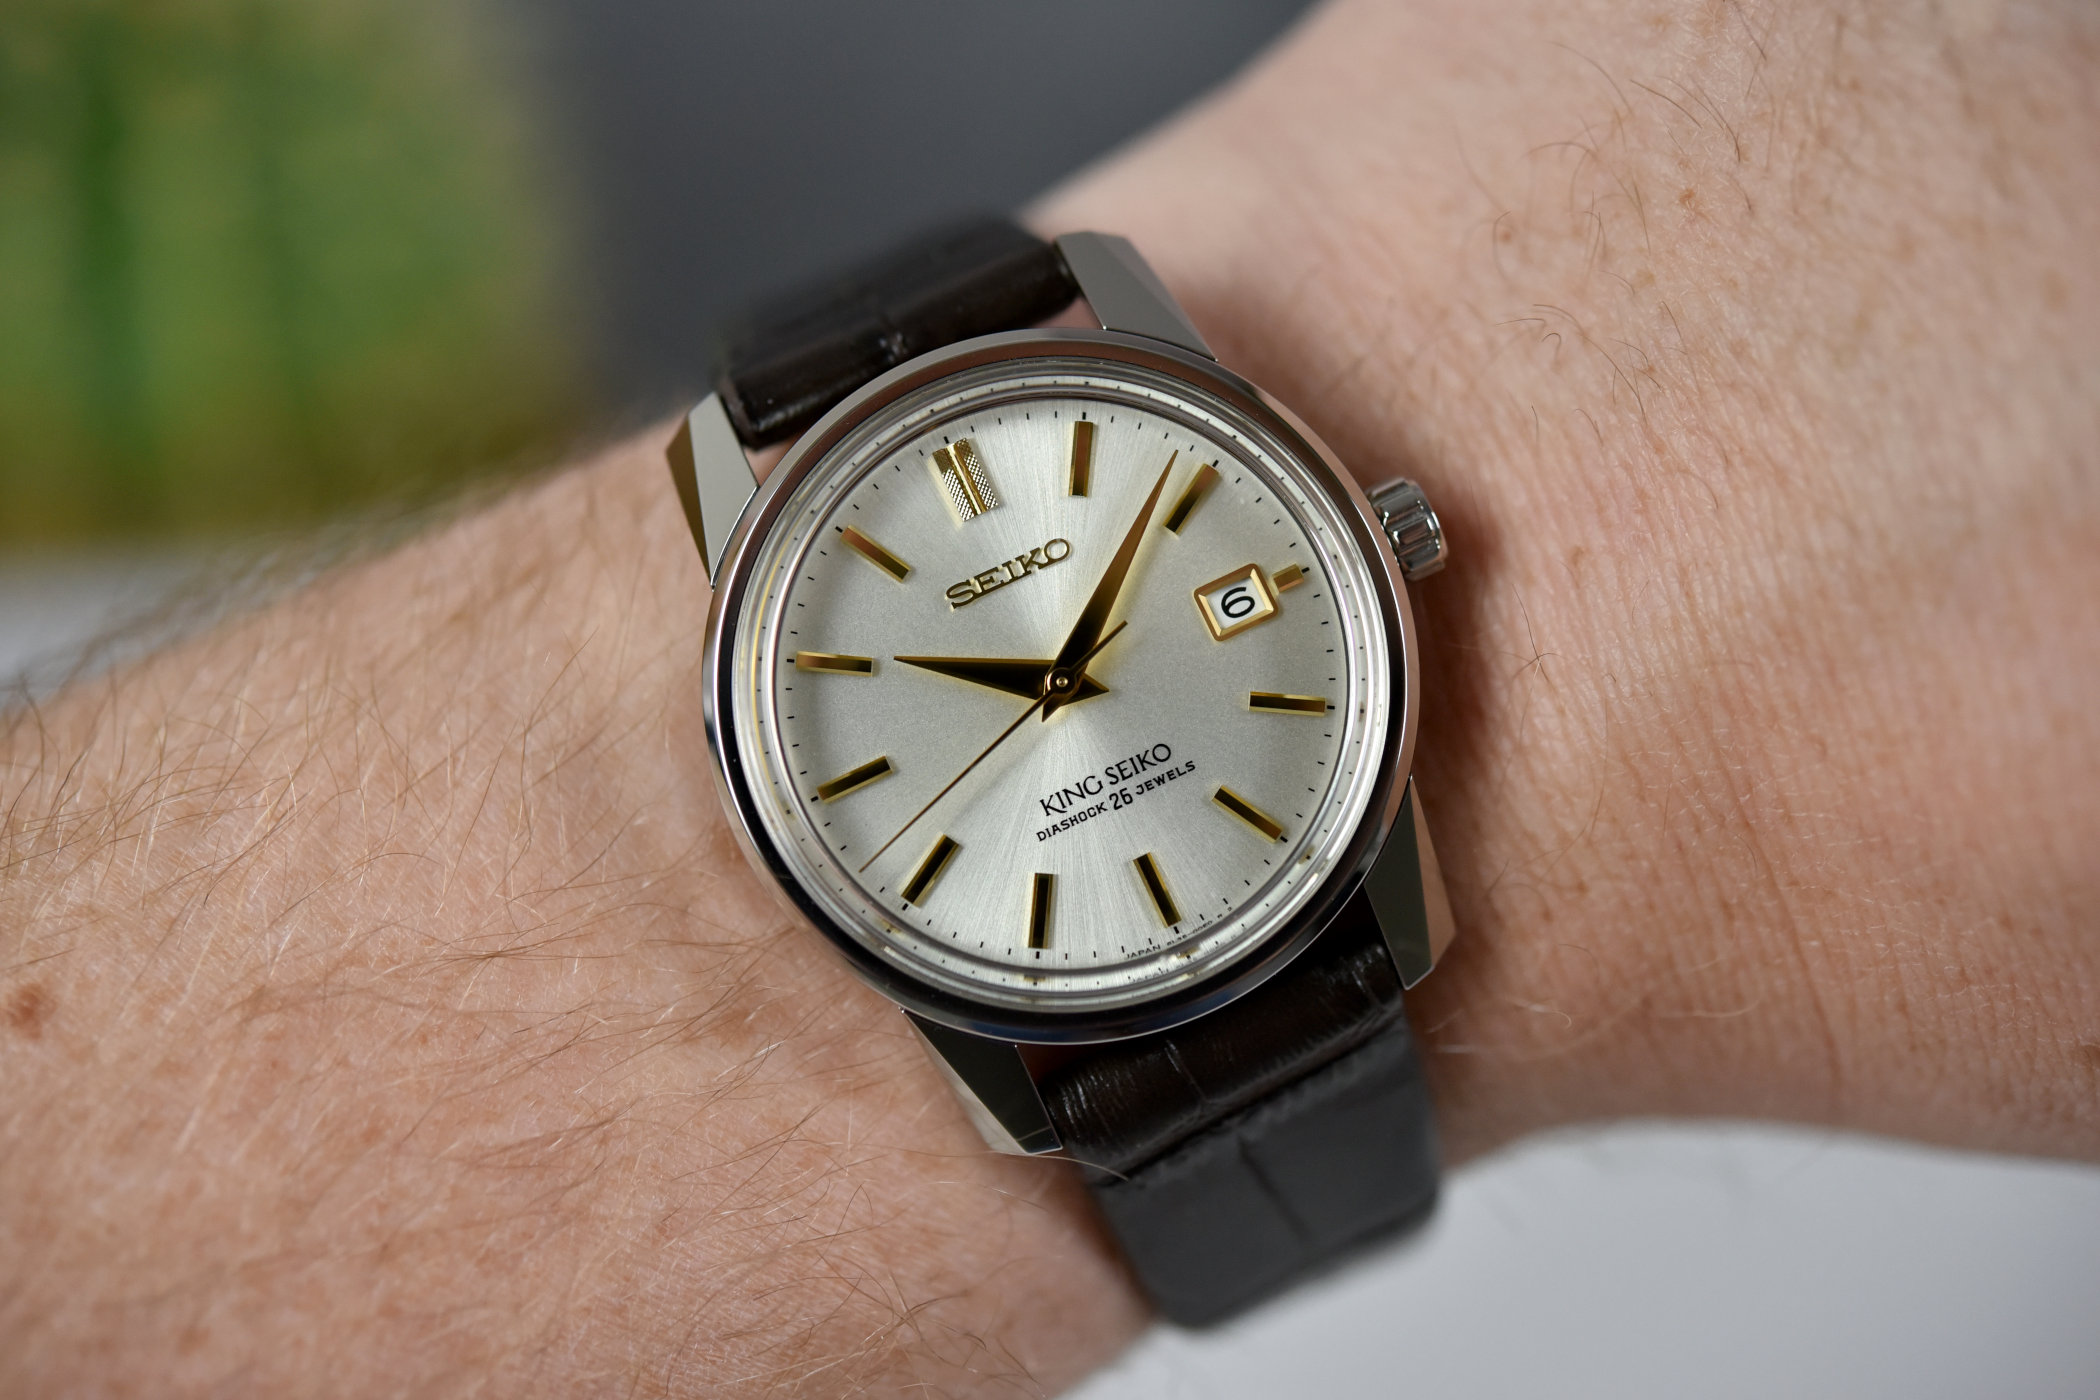 Why I Think The Return of King Seiko Misses The Mark - Monochrome Watches